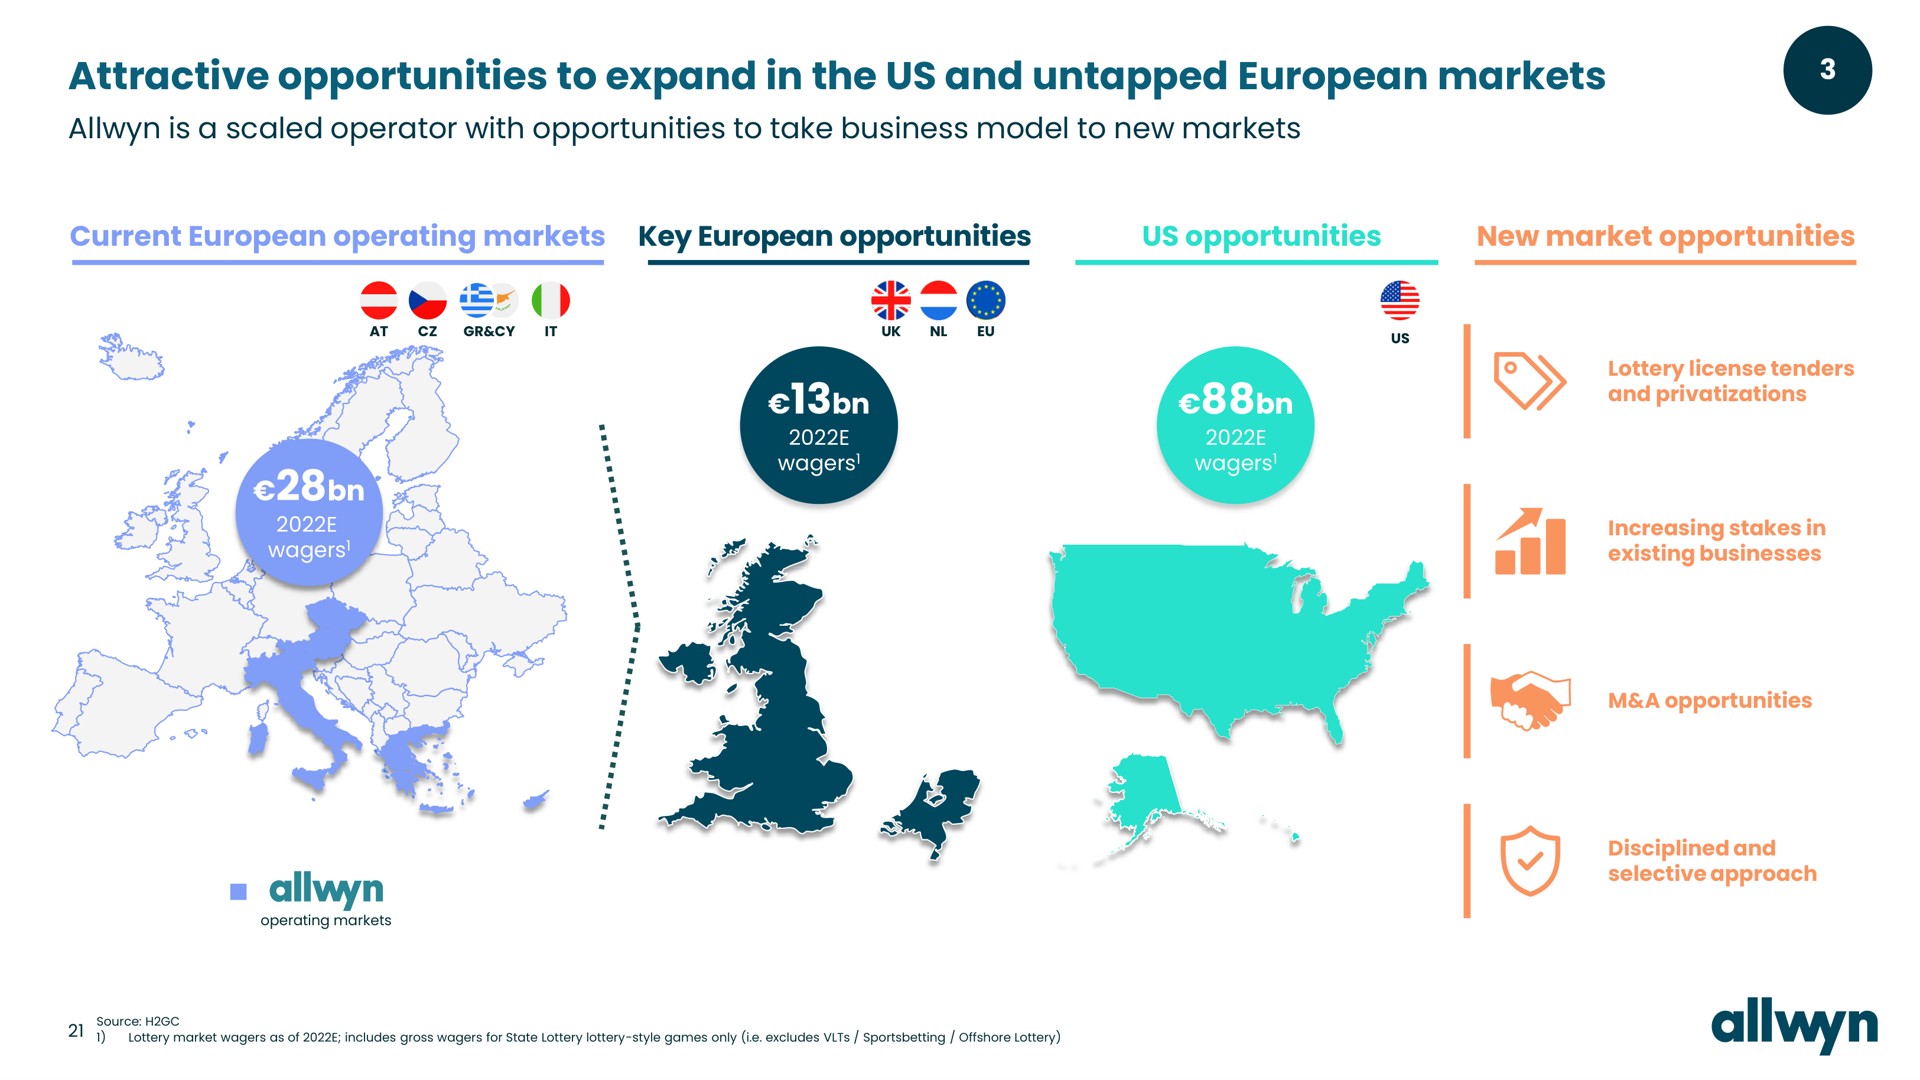 attractive opportunities to expand in the us and untapped markets is a scaled operator with opportunities to take business model to new markets current operating markets key opportunities us opportunities new market opportunities it | Allwyn